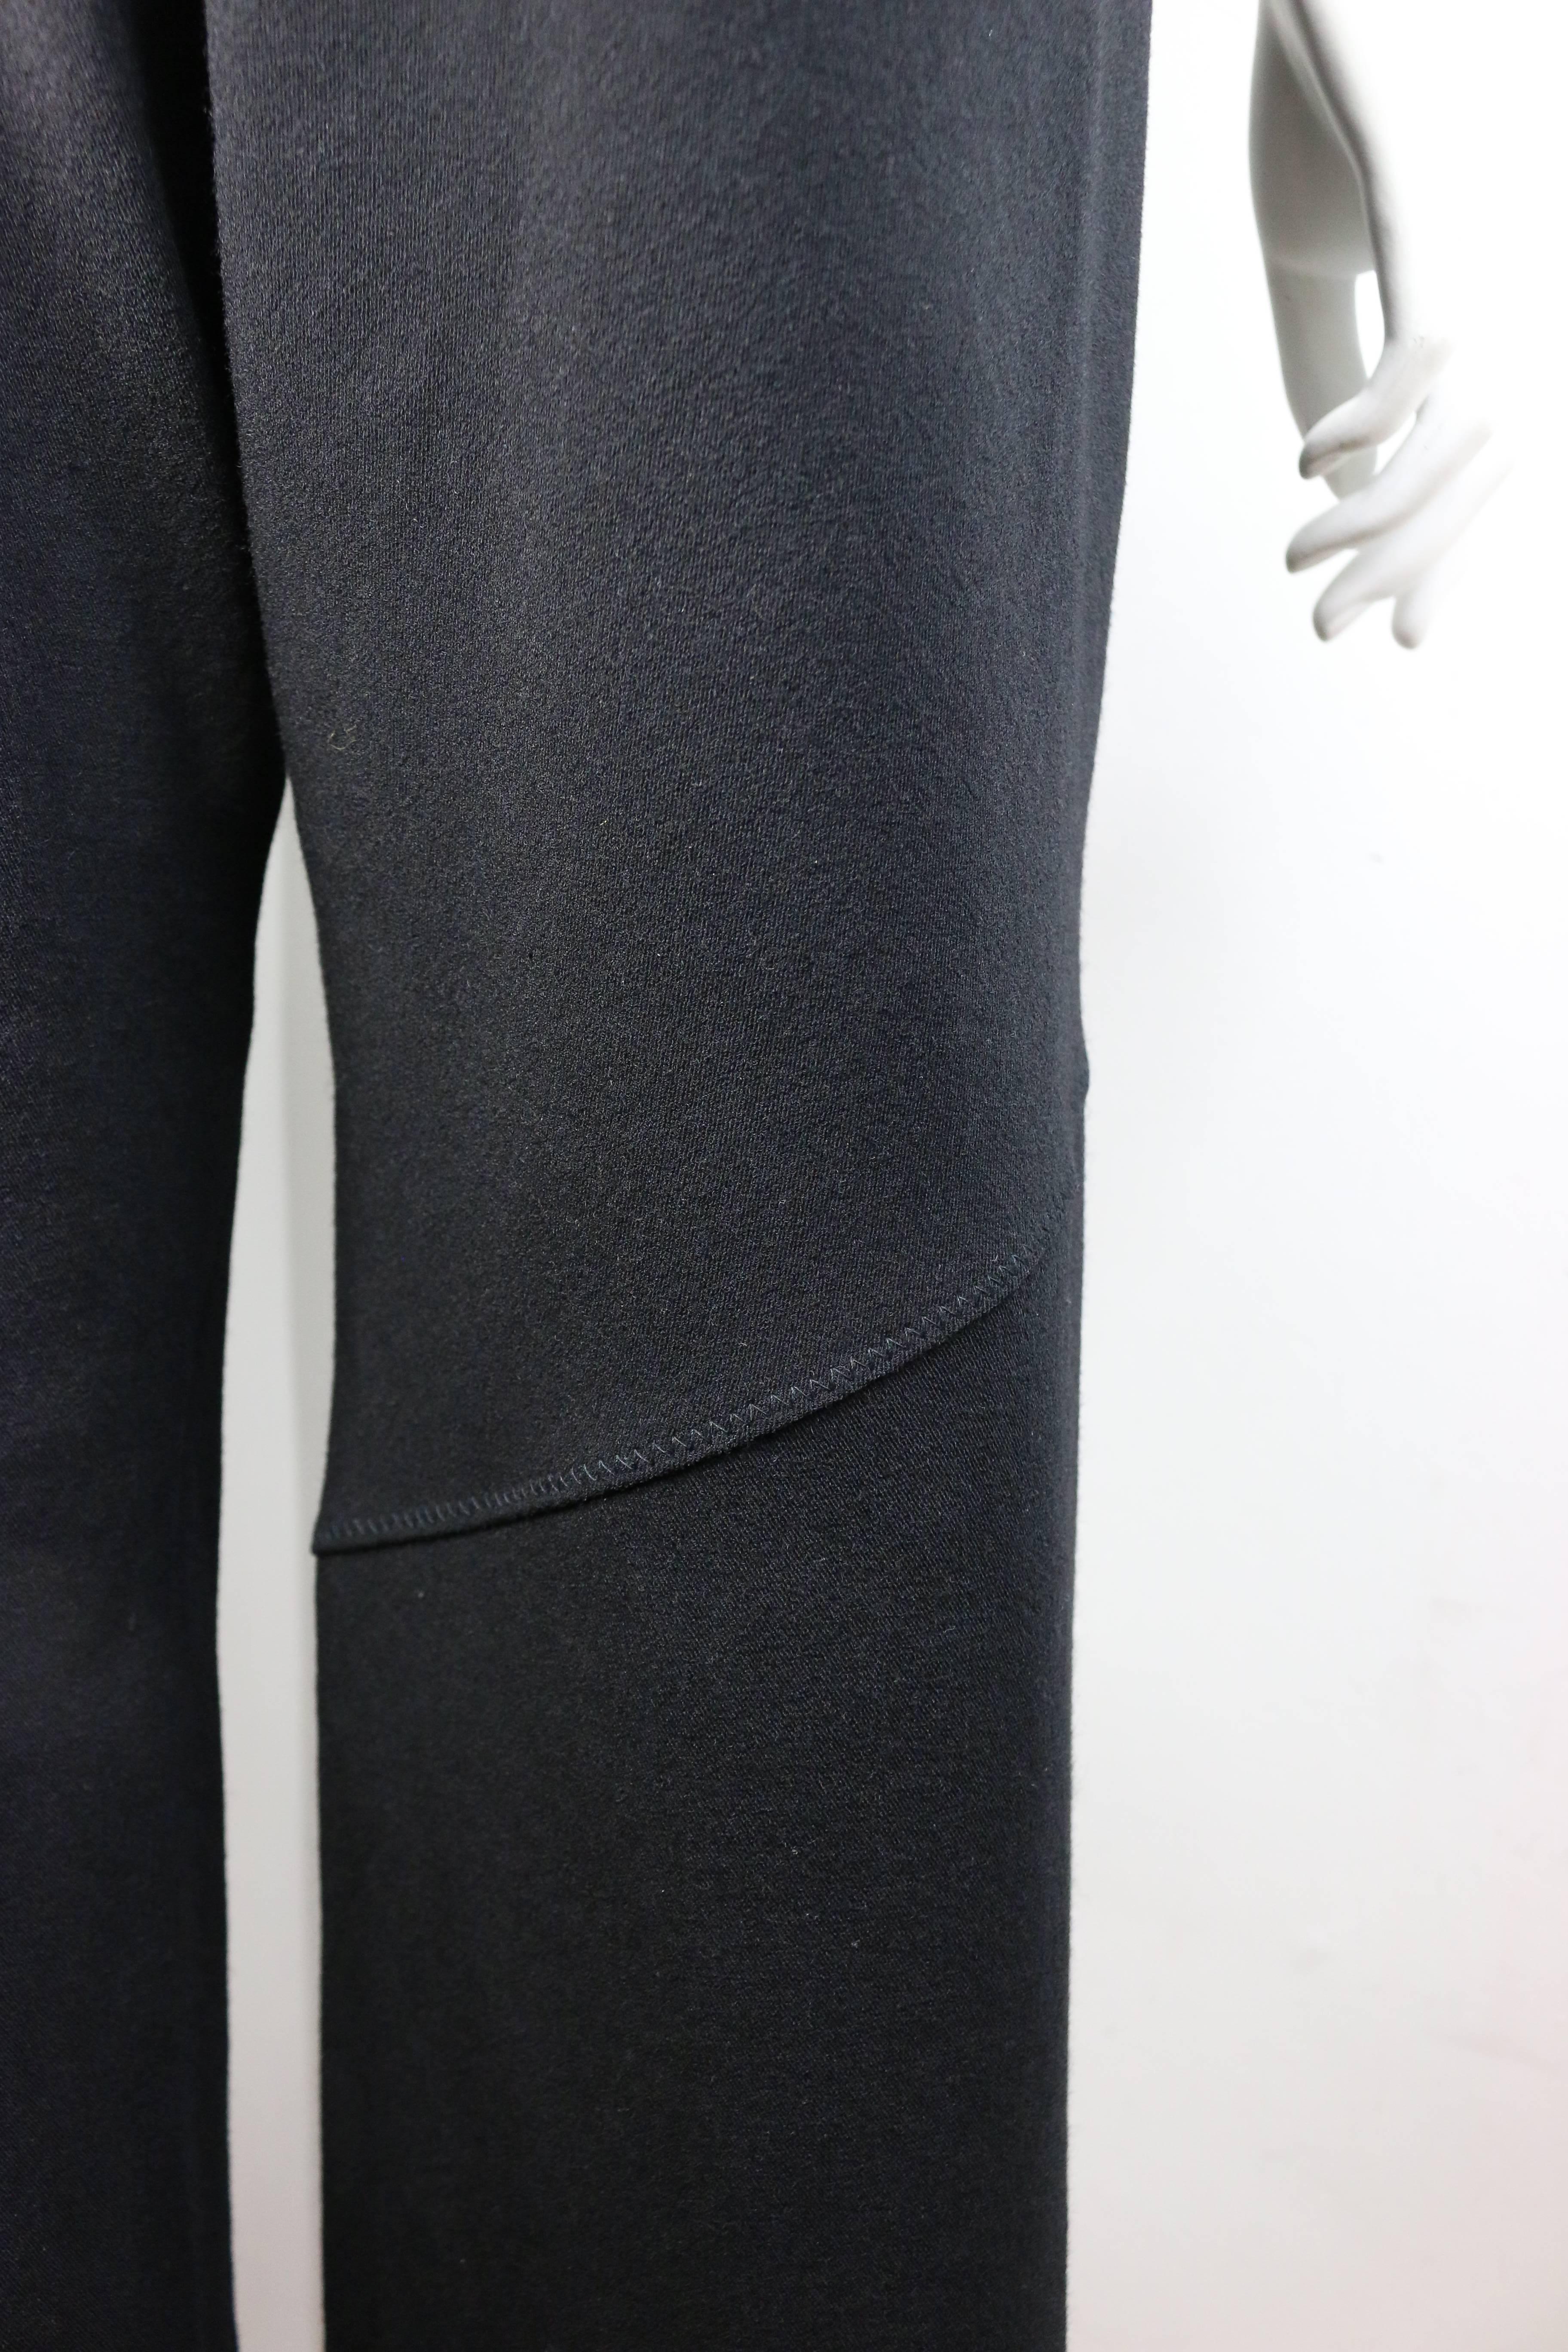 Issey Miyake Black Wool Straight Wide Leg Pants  In New Condition For Sale In Sheung Wan, HK